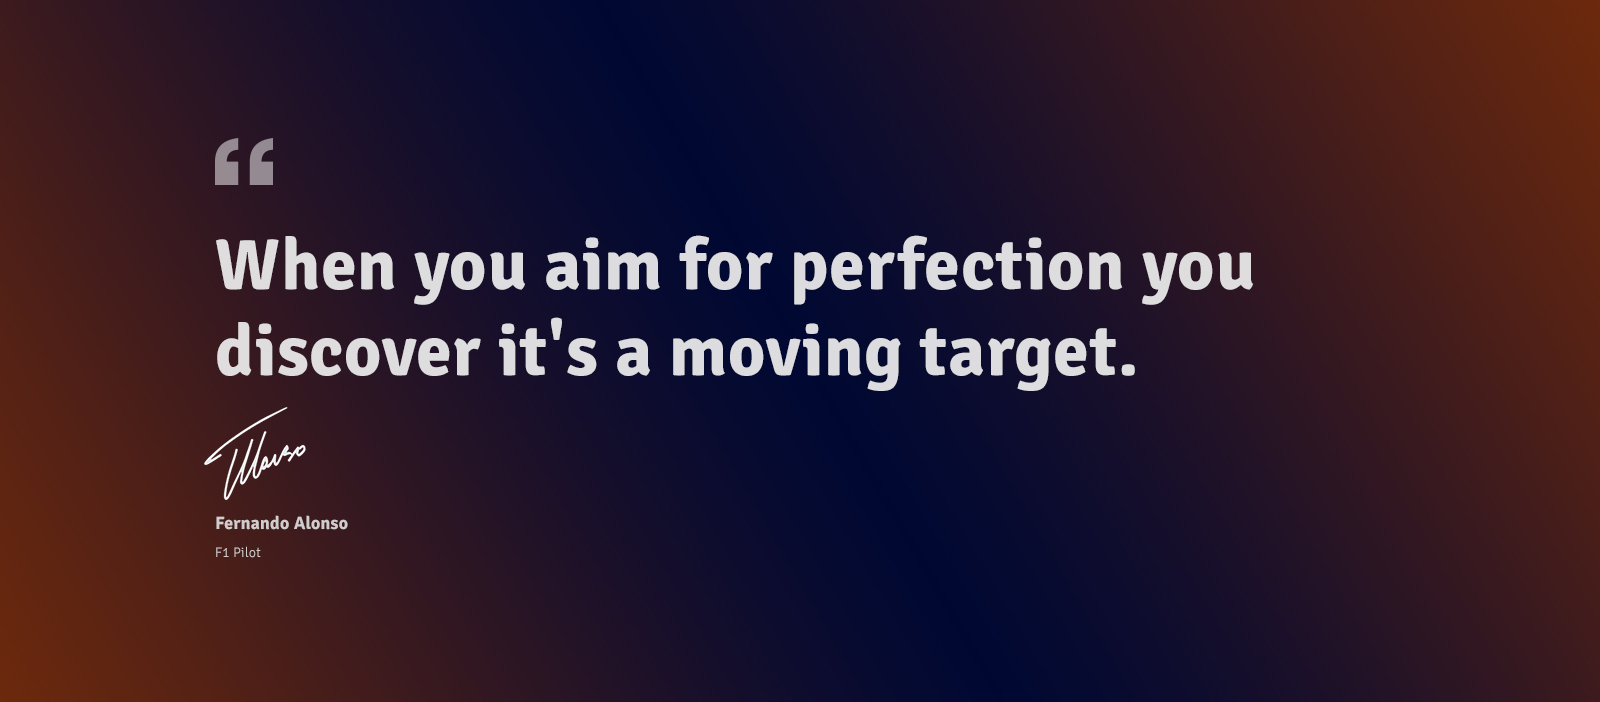 perfection is a moving target